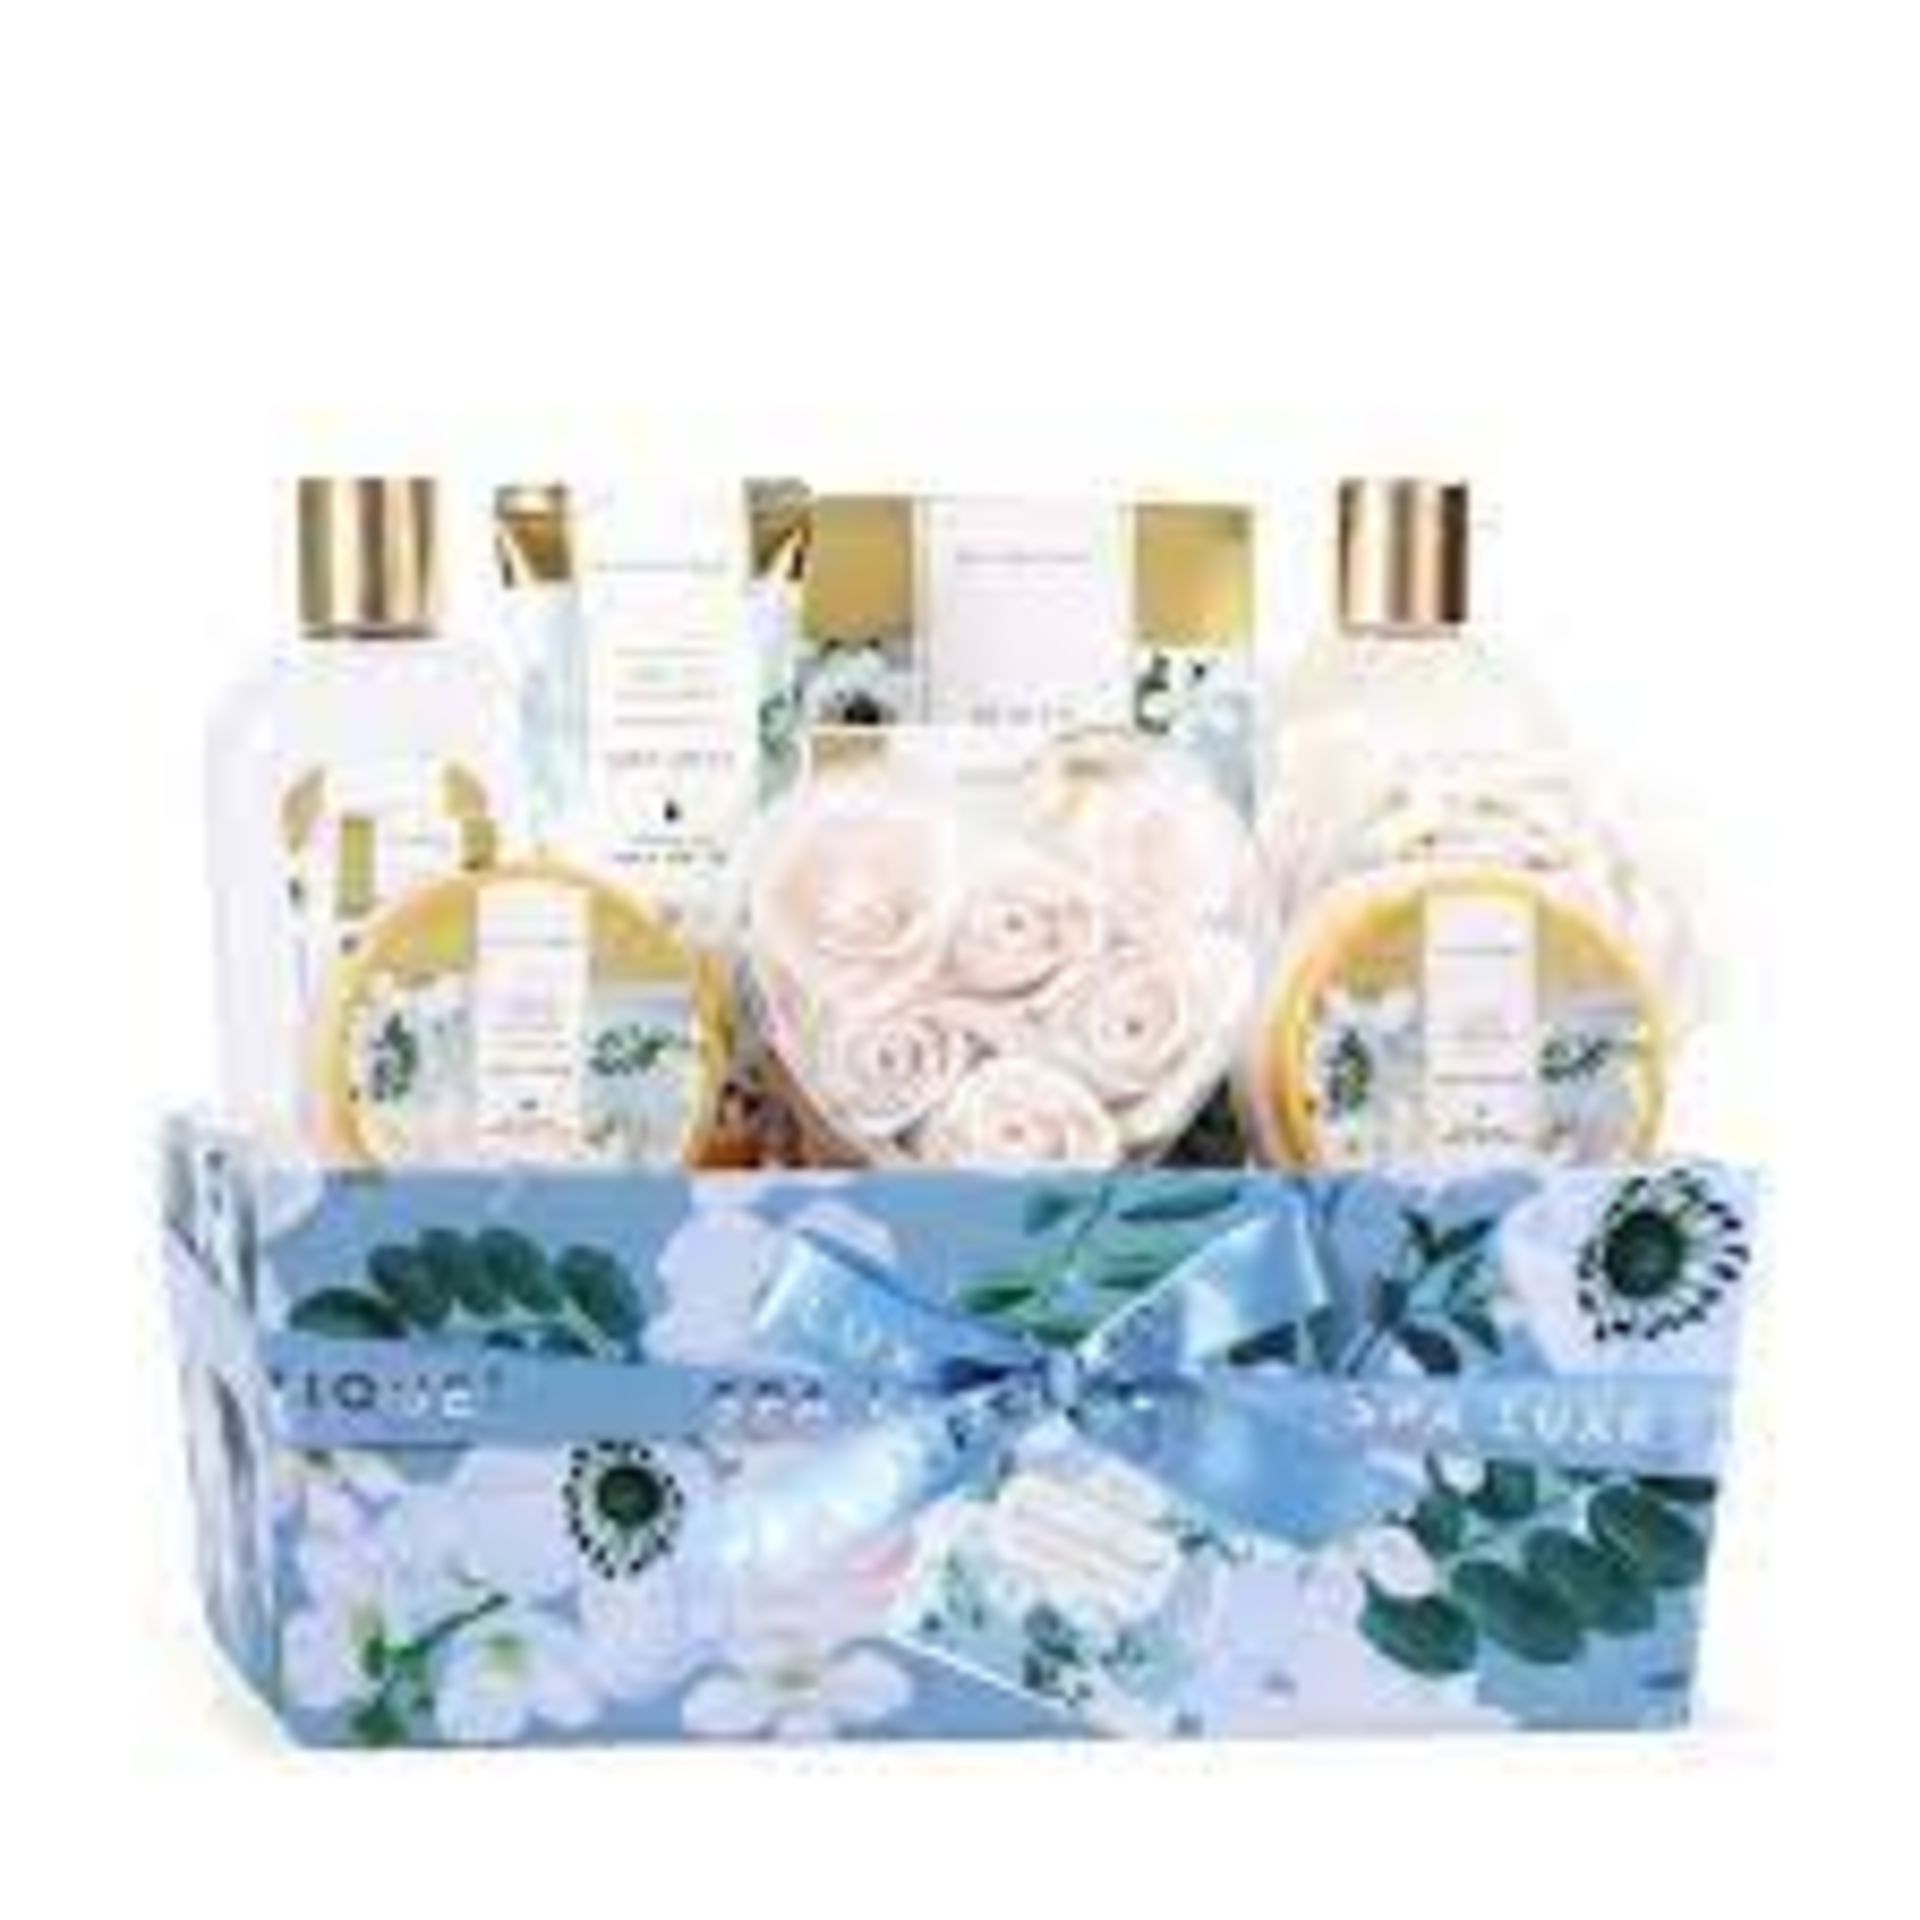 PALLET TO CONTAIN 72 x New Packaged Spa Luxetique White Jasmine Home Spa Basket Set. (SKU: spa-bp-